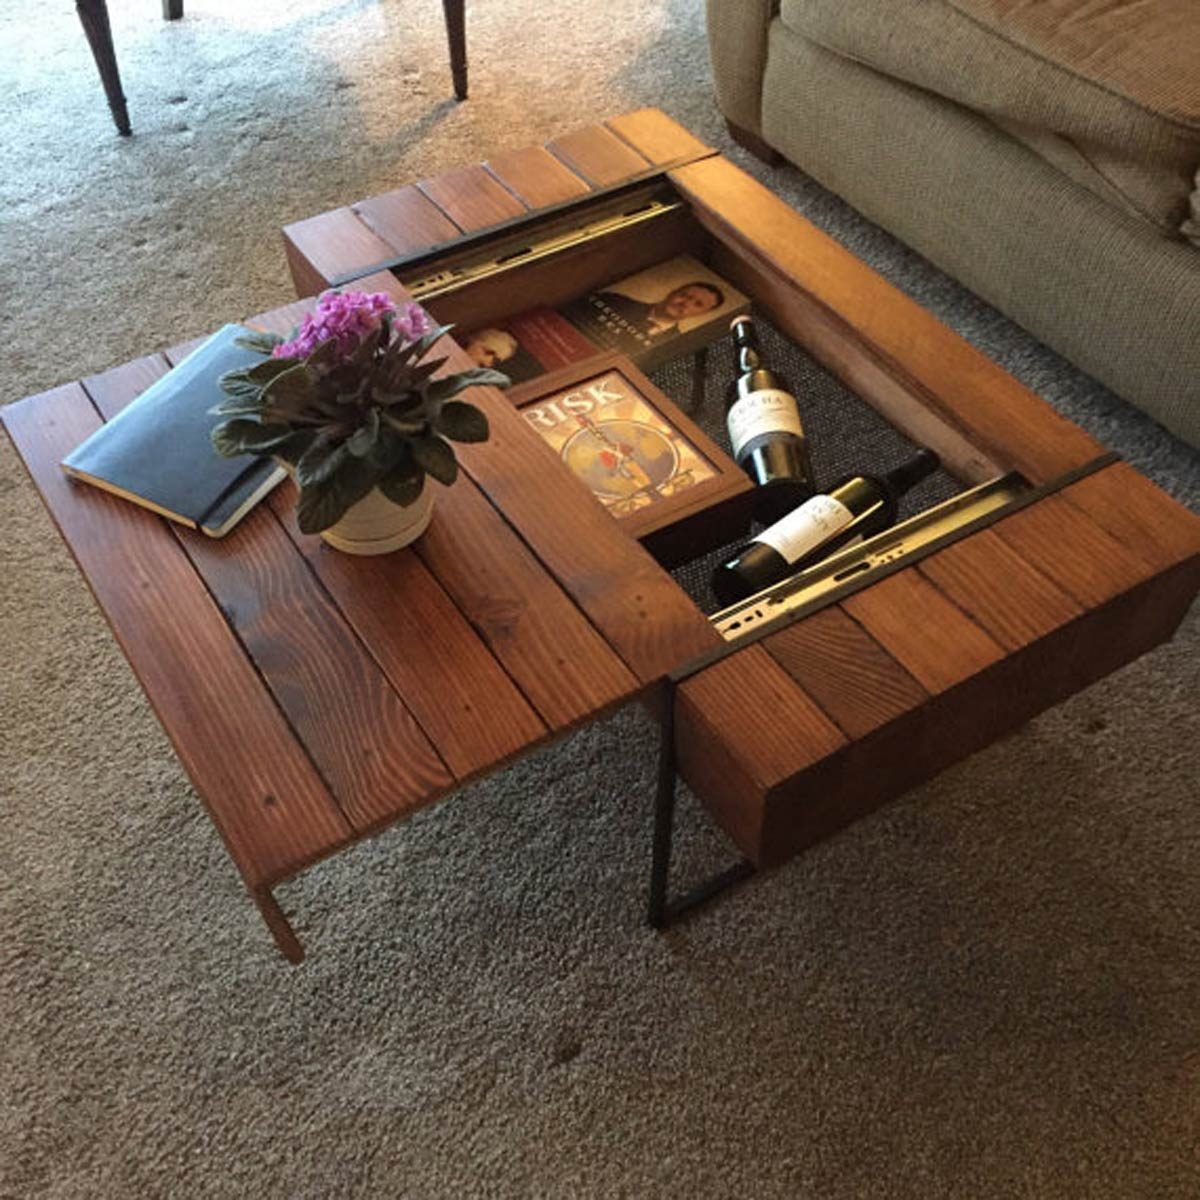 12 Pieces Of Furniture With Hidden Compartments | Family Handyman With Coffee Tables With Hidden Compartments (Gallery 3 of 20)